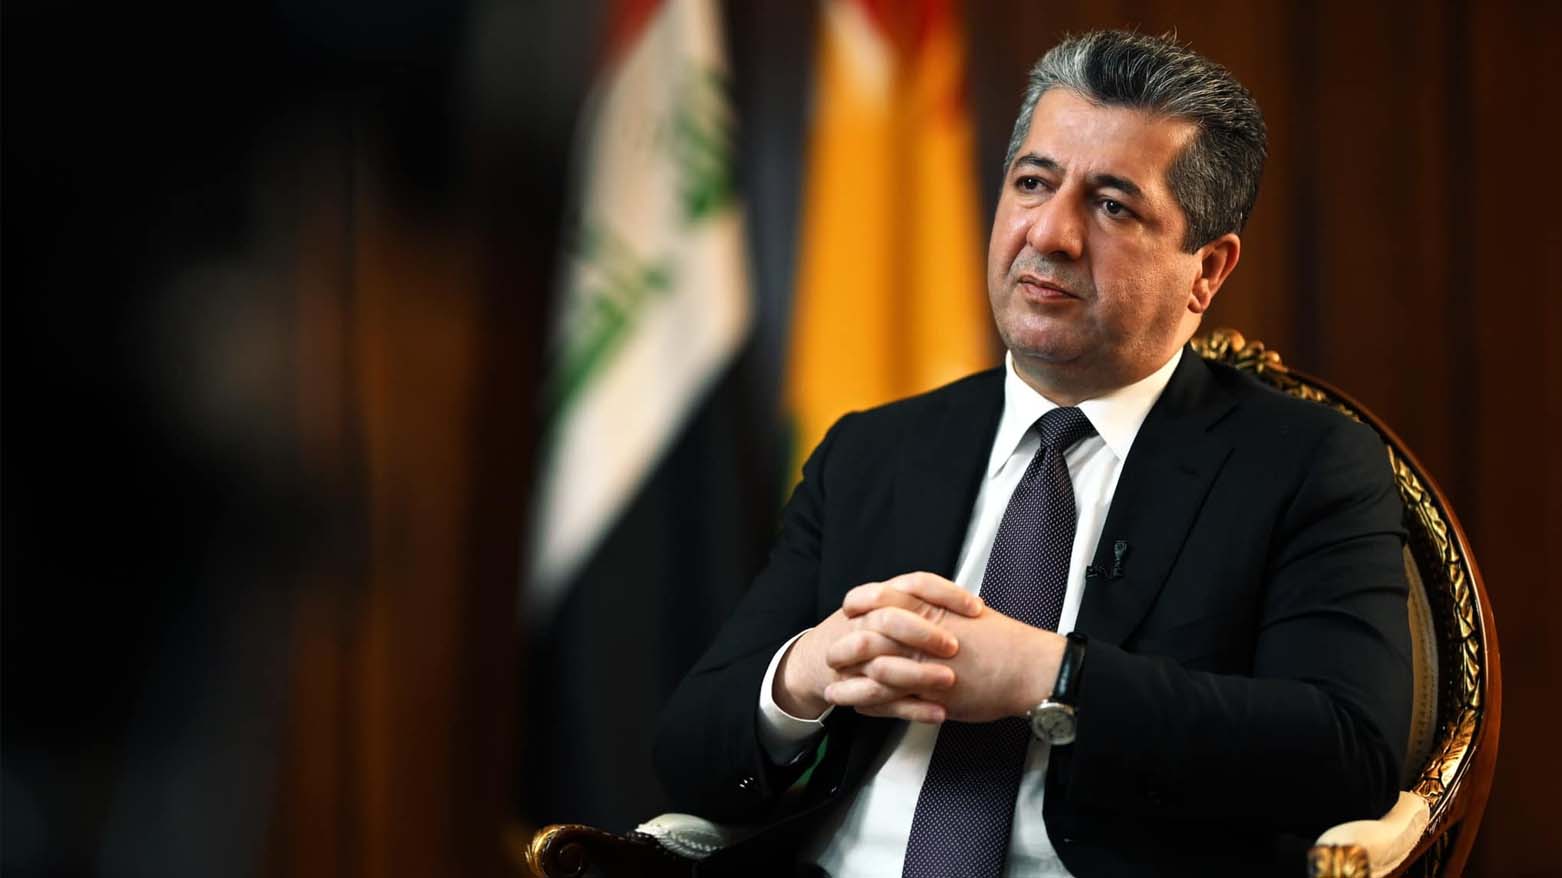 Kurdistan Region Prime Minister Masrour Barzani is pictured during a televised message in Erbil. (Photo: KRG)